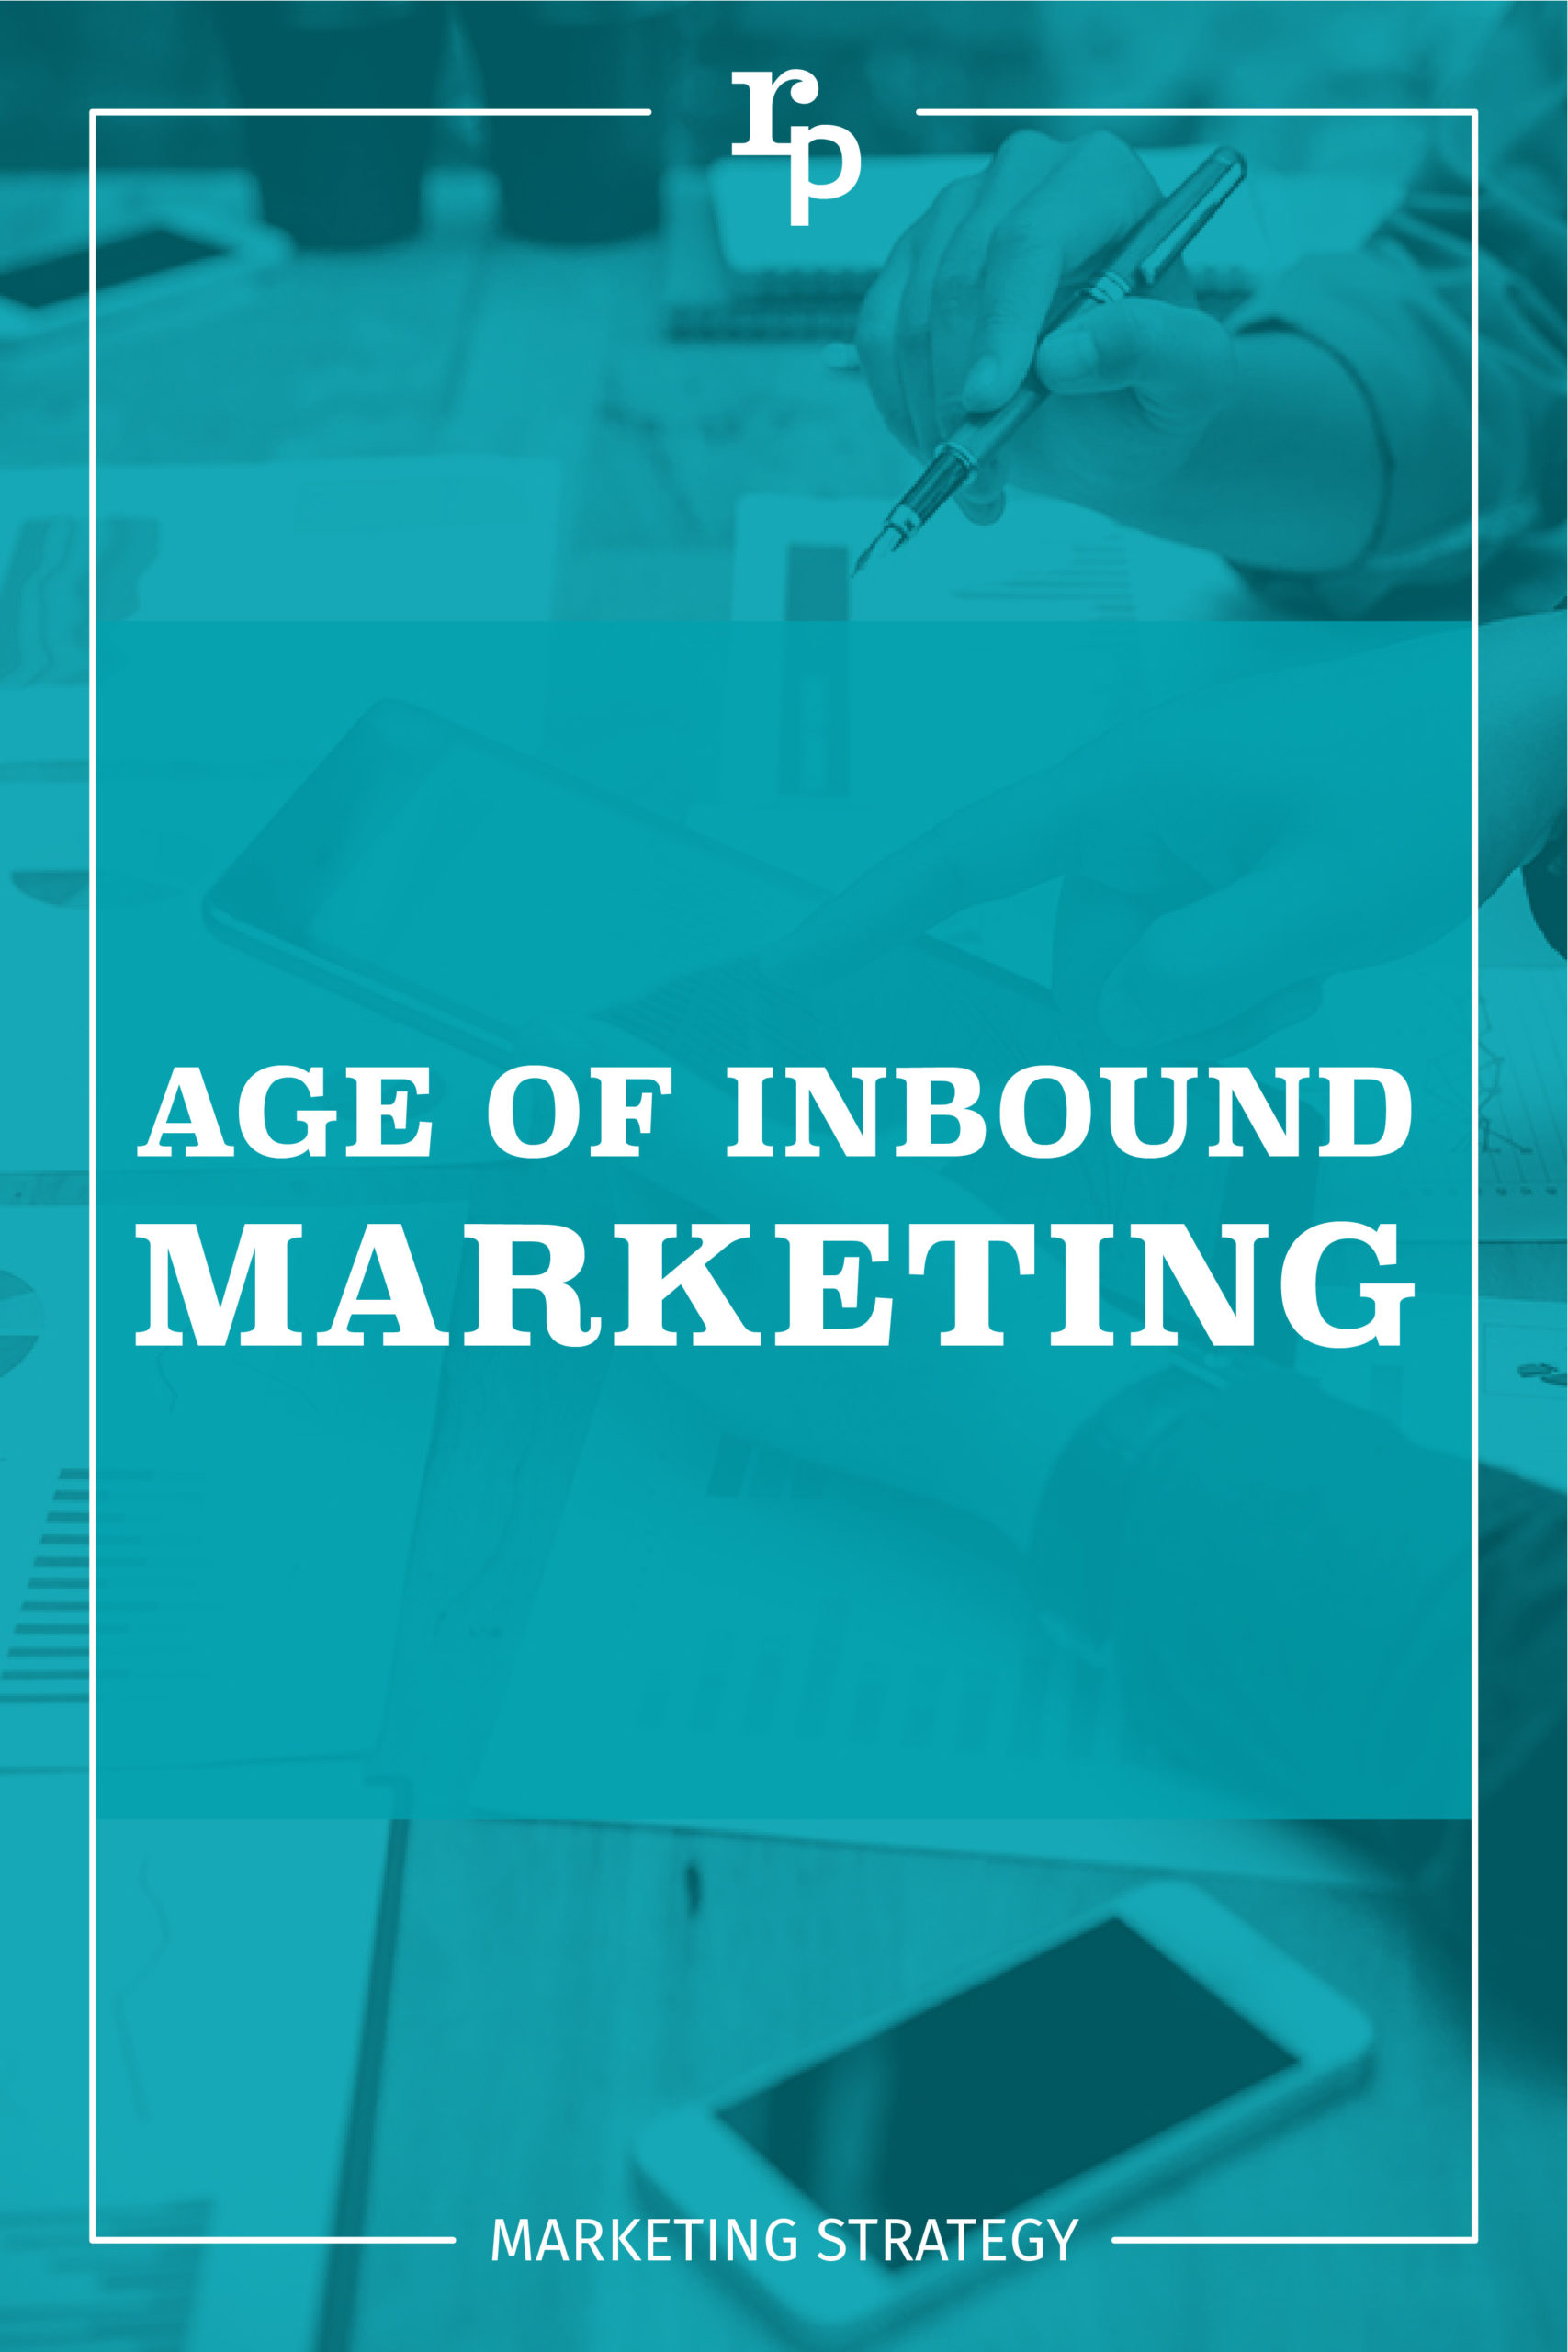 age of inbound marketing strategy2 pin teal scaled